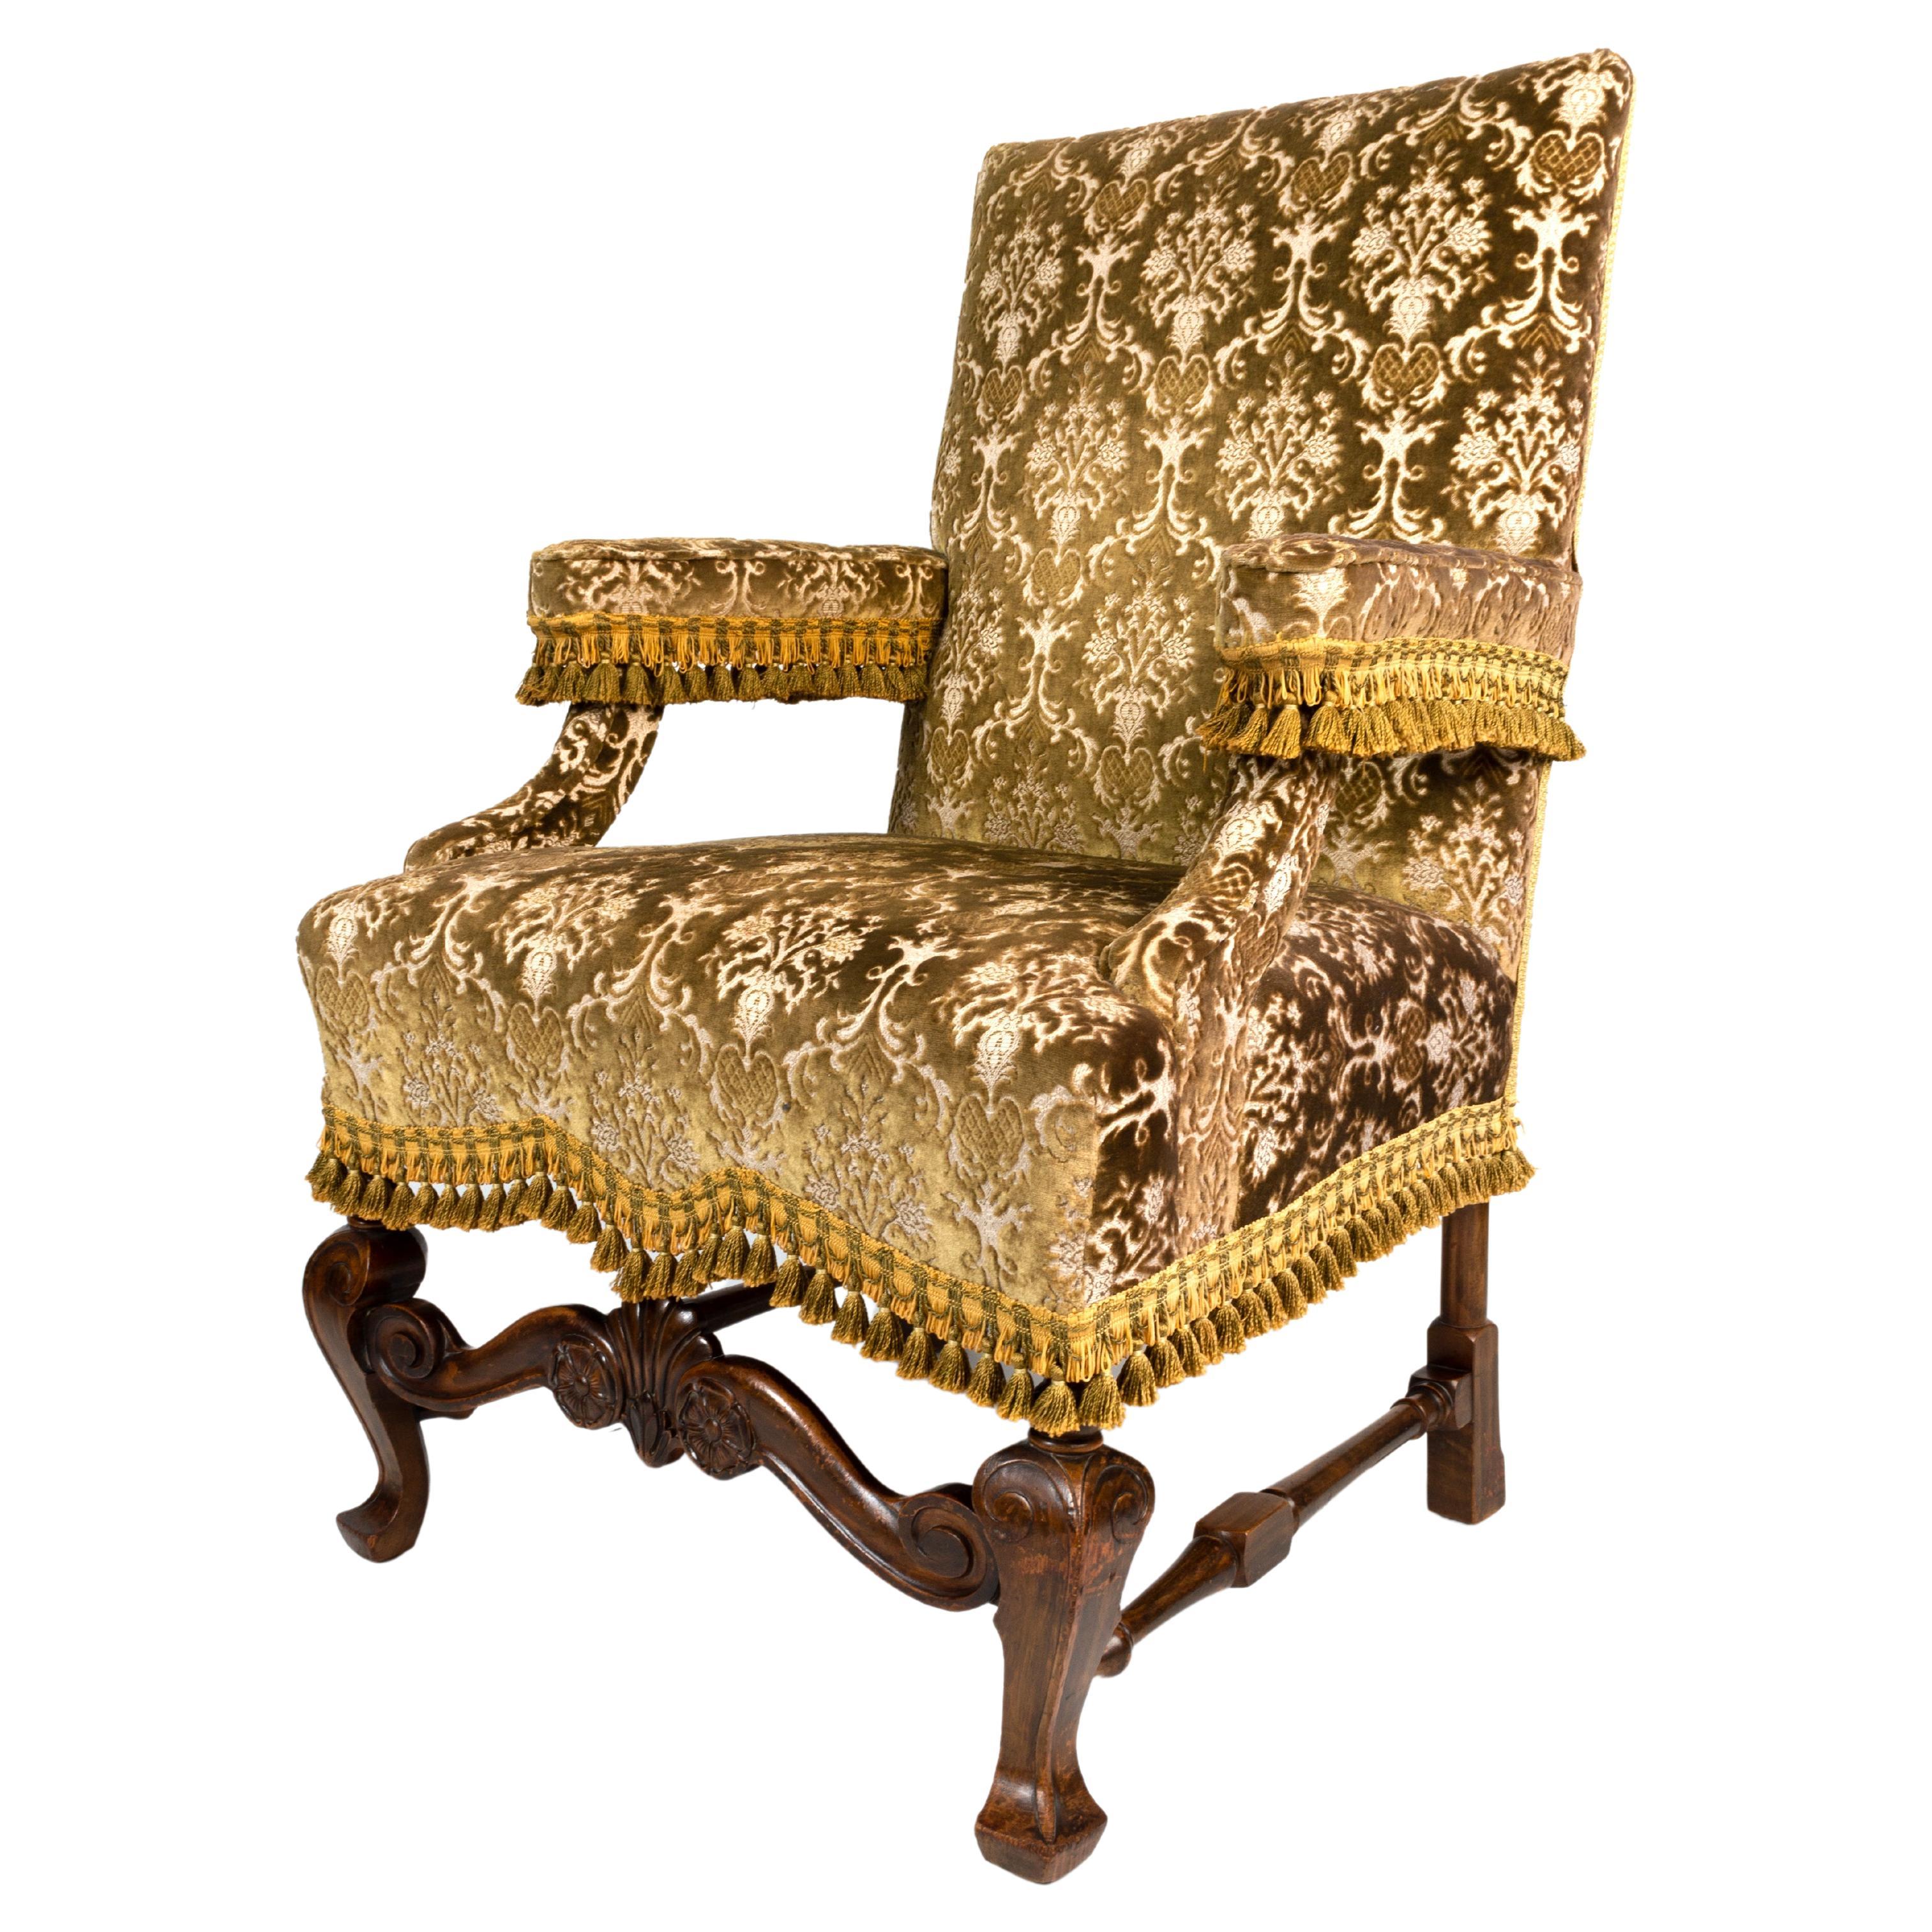 Antique English William and Mary Revival Elbow Chair Armchair